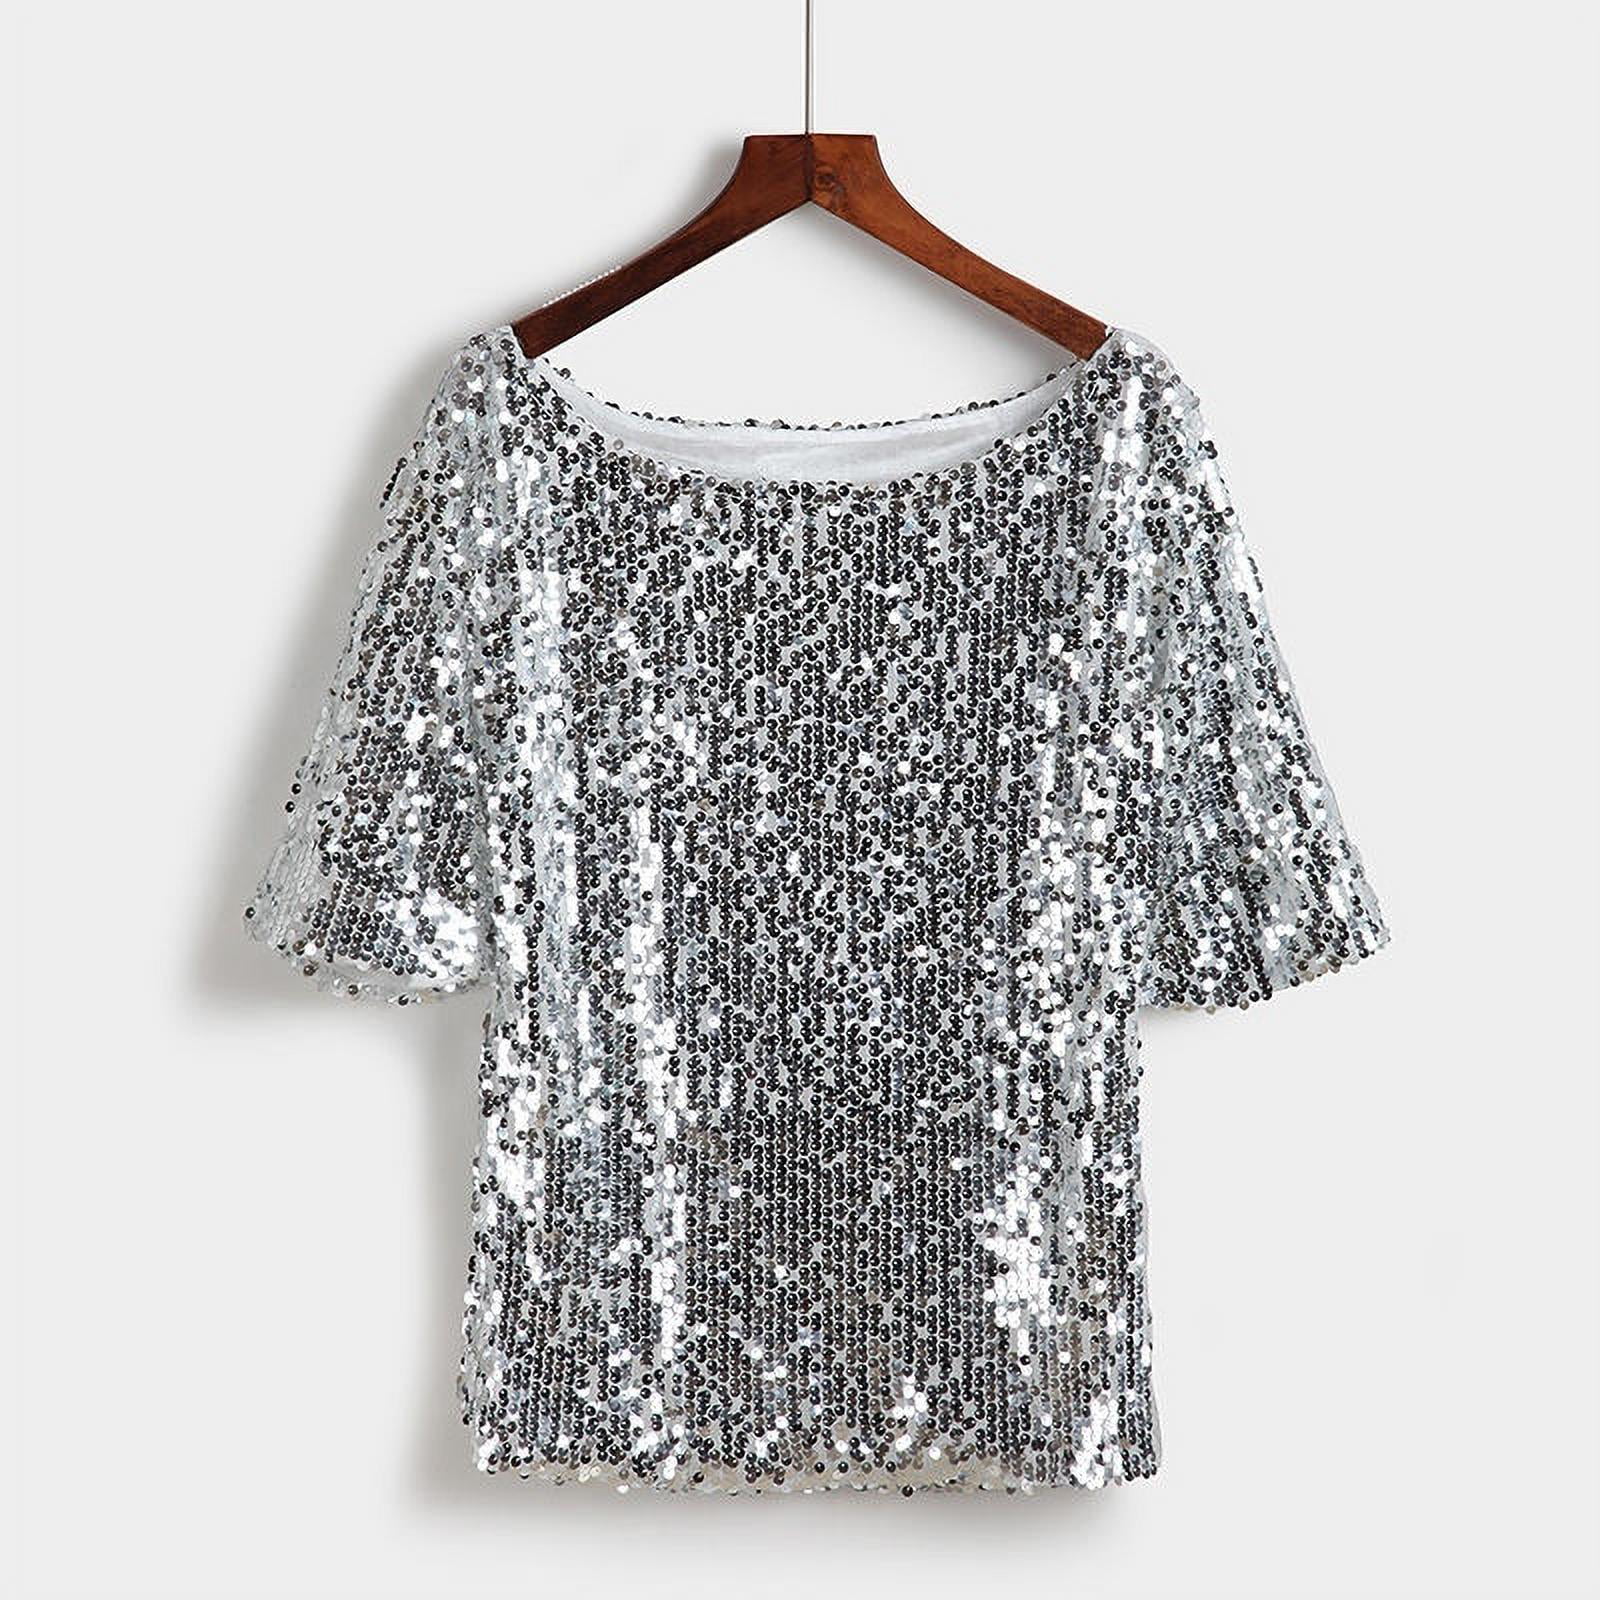 Womens 3/4 Sleeve Sparkling Glitter Shiny Sequins Party Top Ladies Shirt Dress 